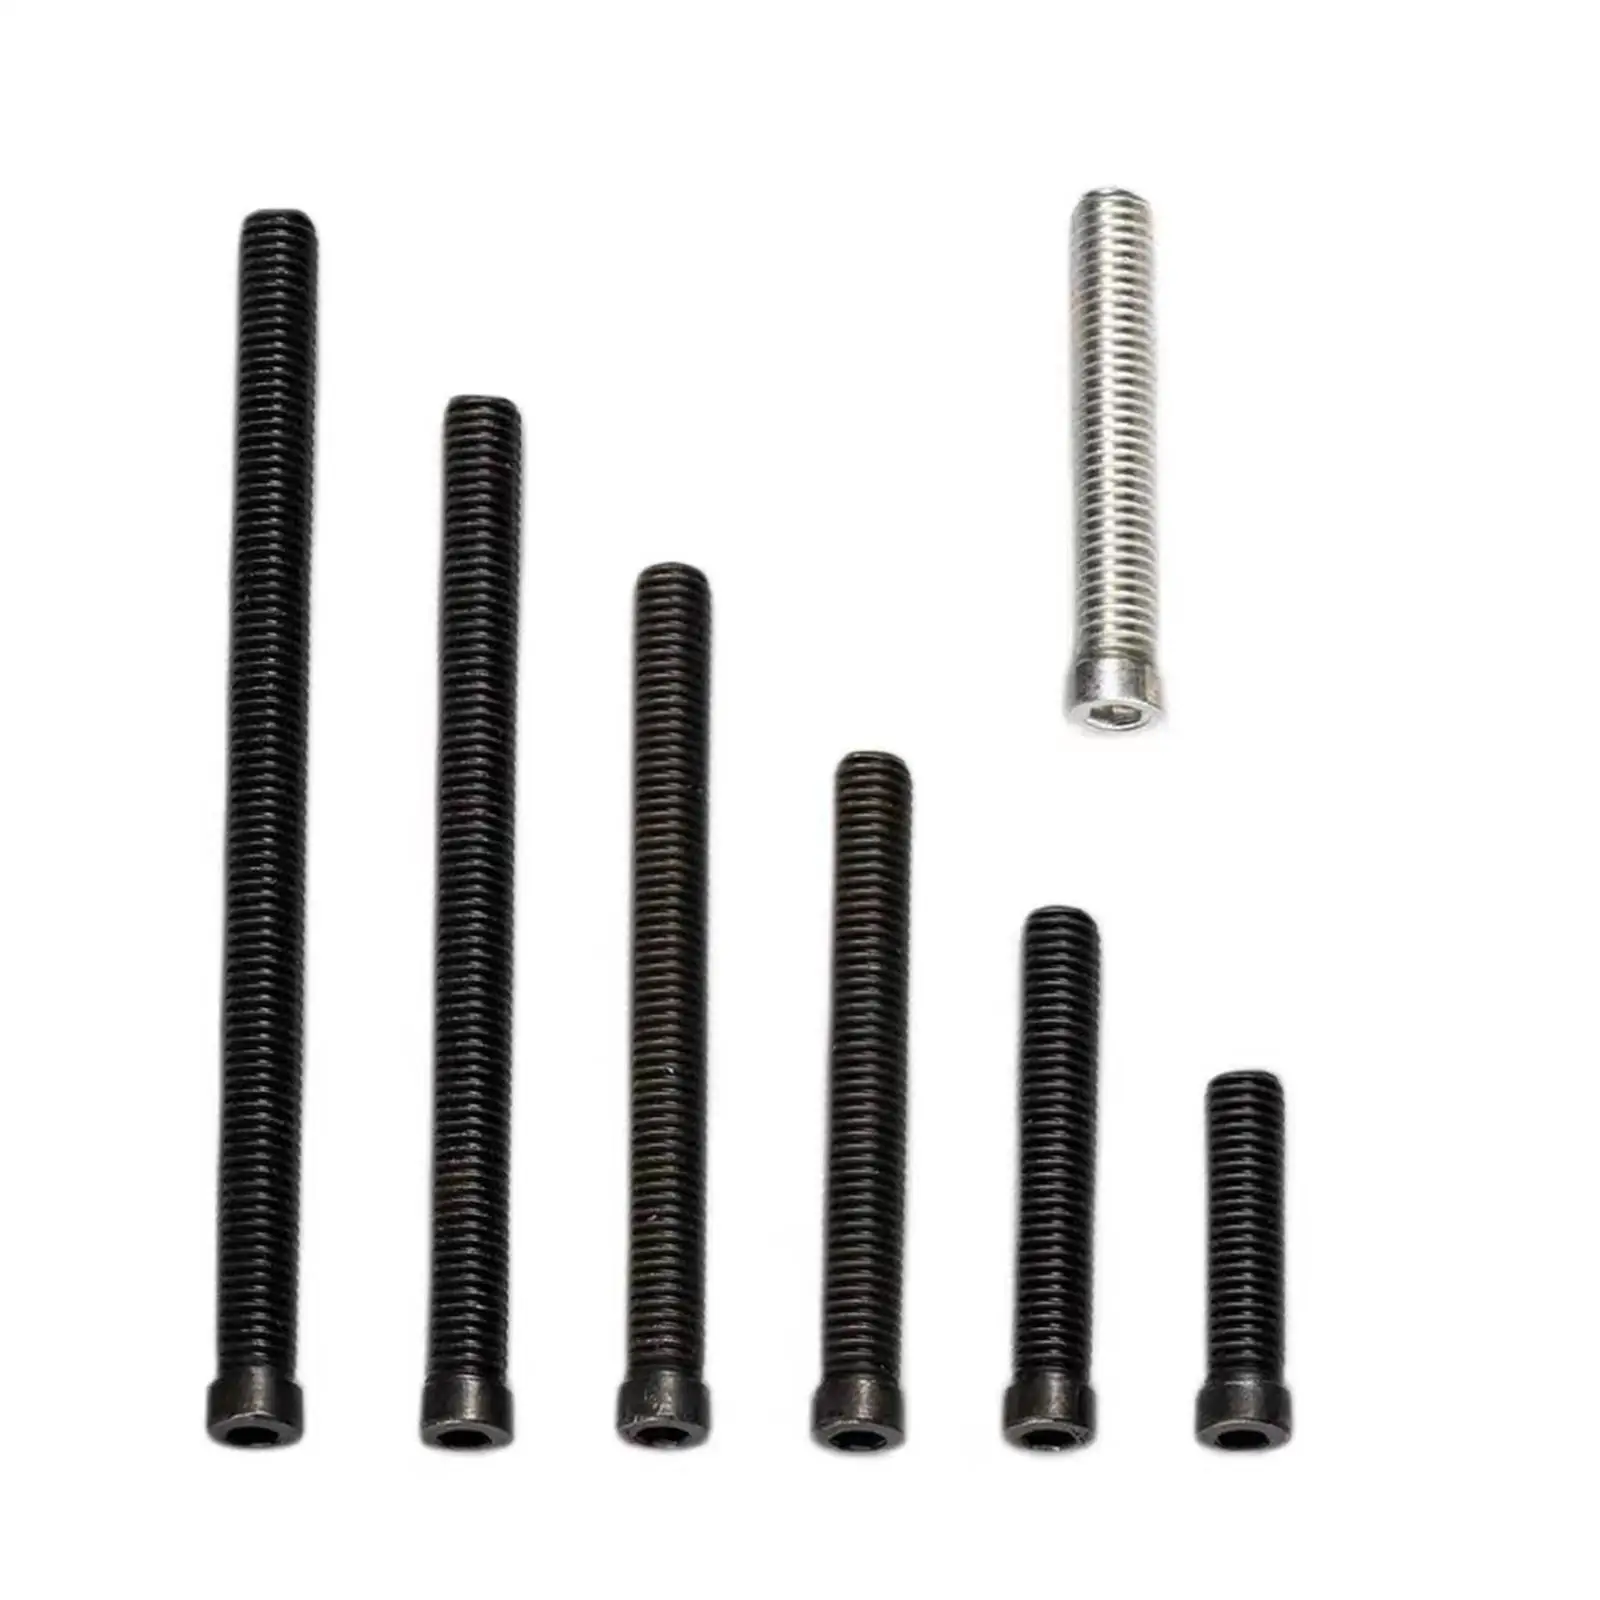 Pool Cue Weight Bolt, Pool Cue Weight Screw, Adjust Cue Weight, Professional Metal Billiard Weight Bolt Tool for Outdoor Sports